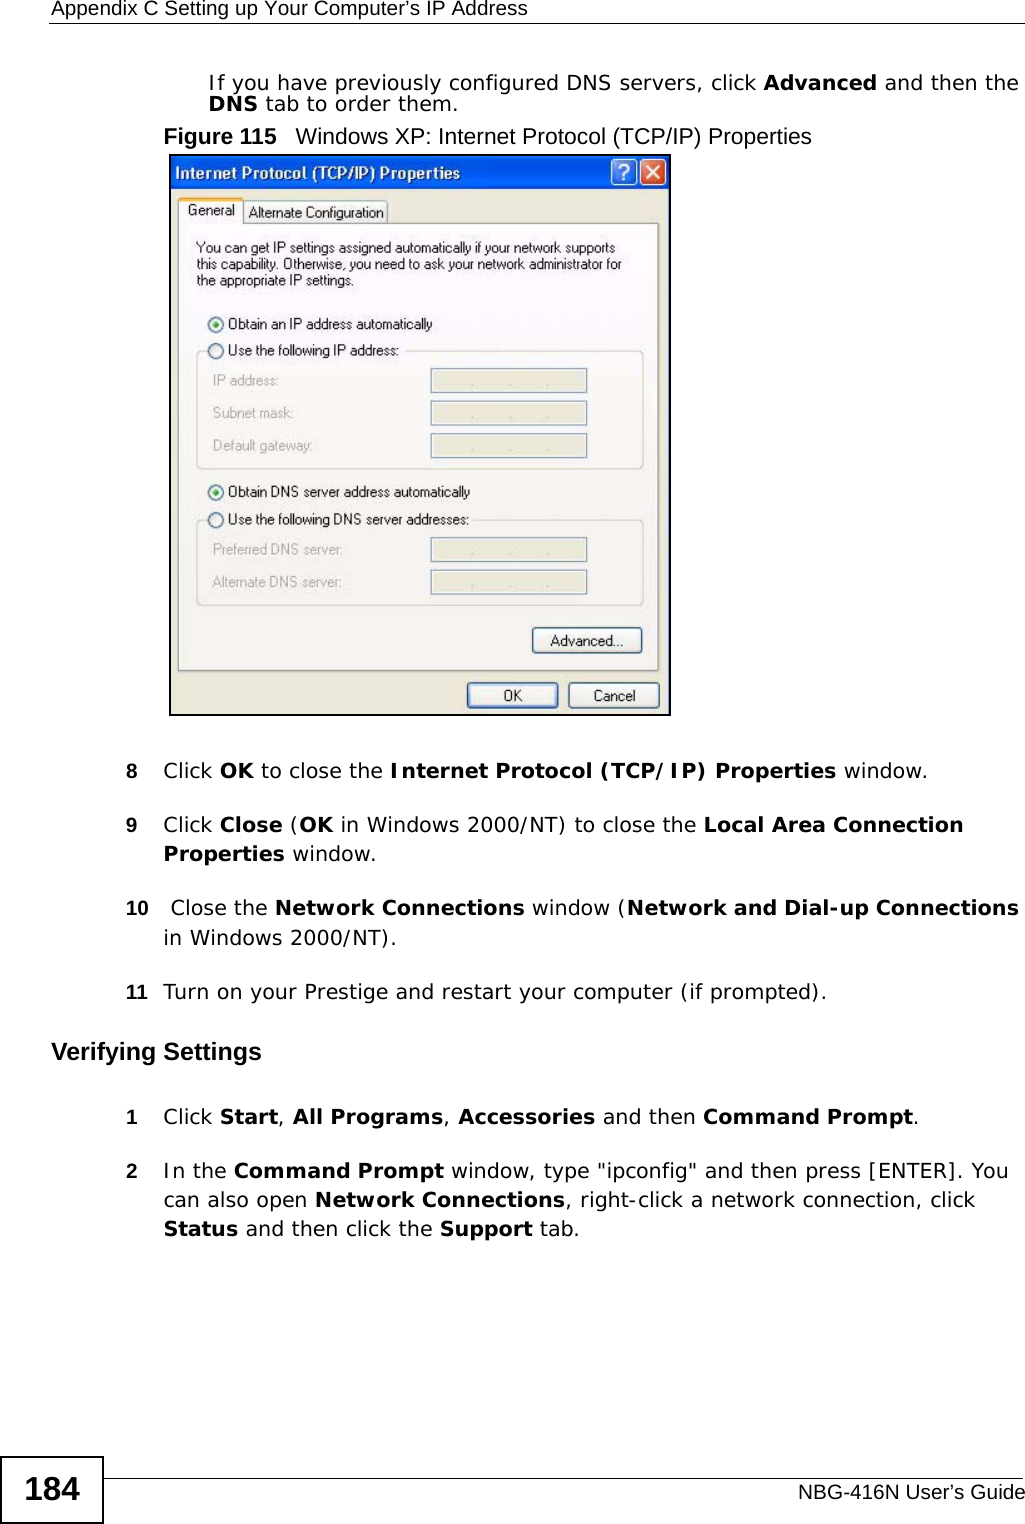 Appendix C Setting up Your Computer’s IP AddressNBG-416N User’s Guide184If you have previously configured DNS servers, click Advanced and then the DNS tab to order them.Figure 115   Windows XP: Internet Protocol (TCP/IP) Properties8Click OK to close the Internet Protocol (TCP/IP) Properties window.9Click Close (OK in Windows 2000/NT) to close the Local Area Connection Properties window.10  Close the Network Connections window (Network and Dial-up Connections in Windows 2000/NT).11 Turn on your Prestige and restart your computer (if prompted).Verifying Settings1Click Start, All Programs, Accessories and then Command Prompt.2In the Command Prompt window, type &quot;ipconfig&quot; and then press [ENTER]. You can also open Network Connections, right-click a network connection, click Status and then click the Support tab.